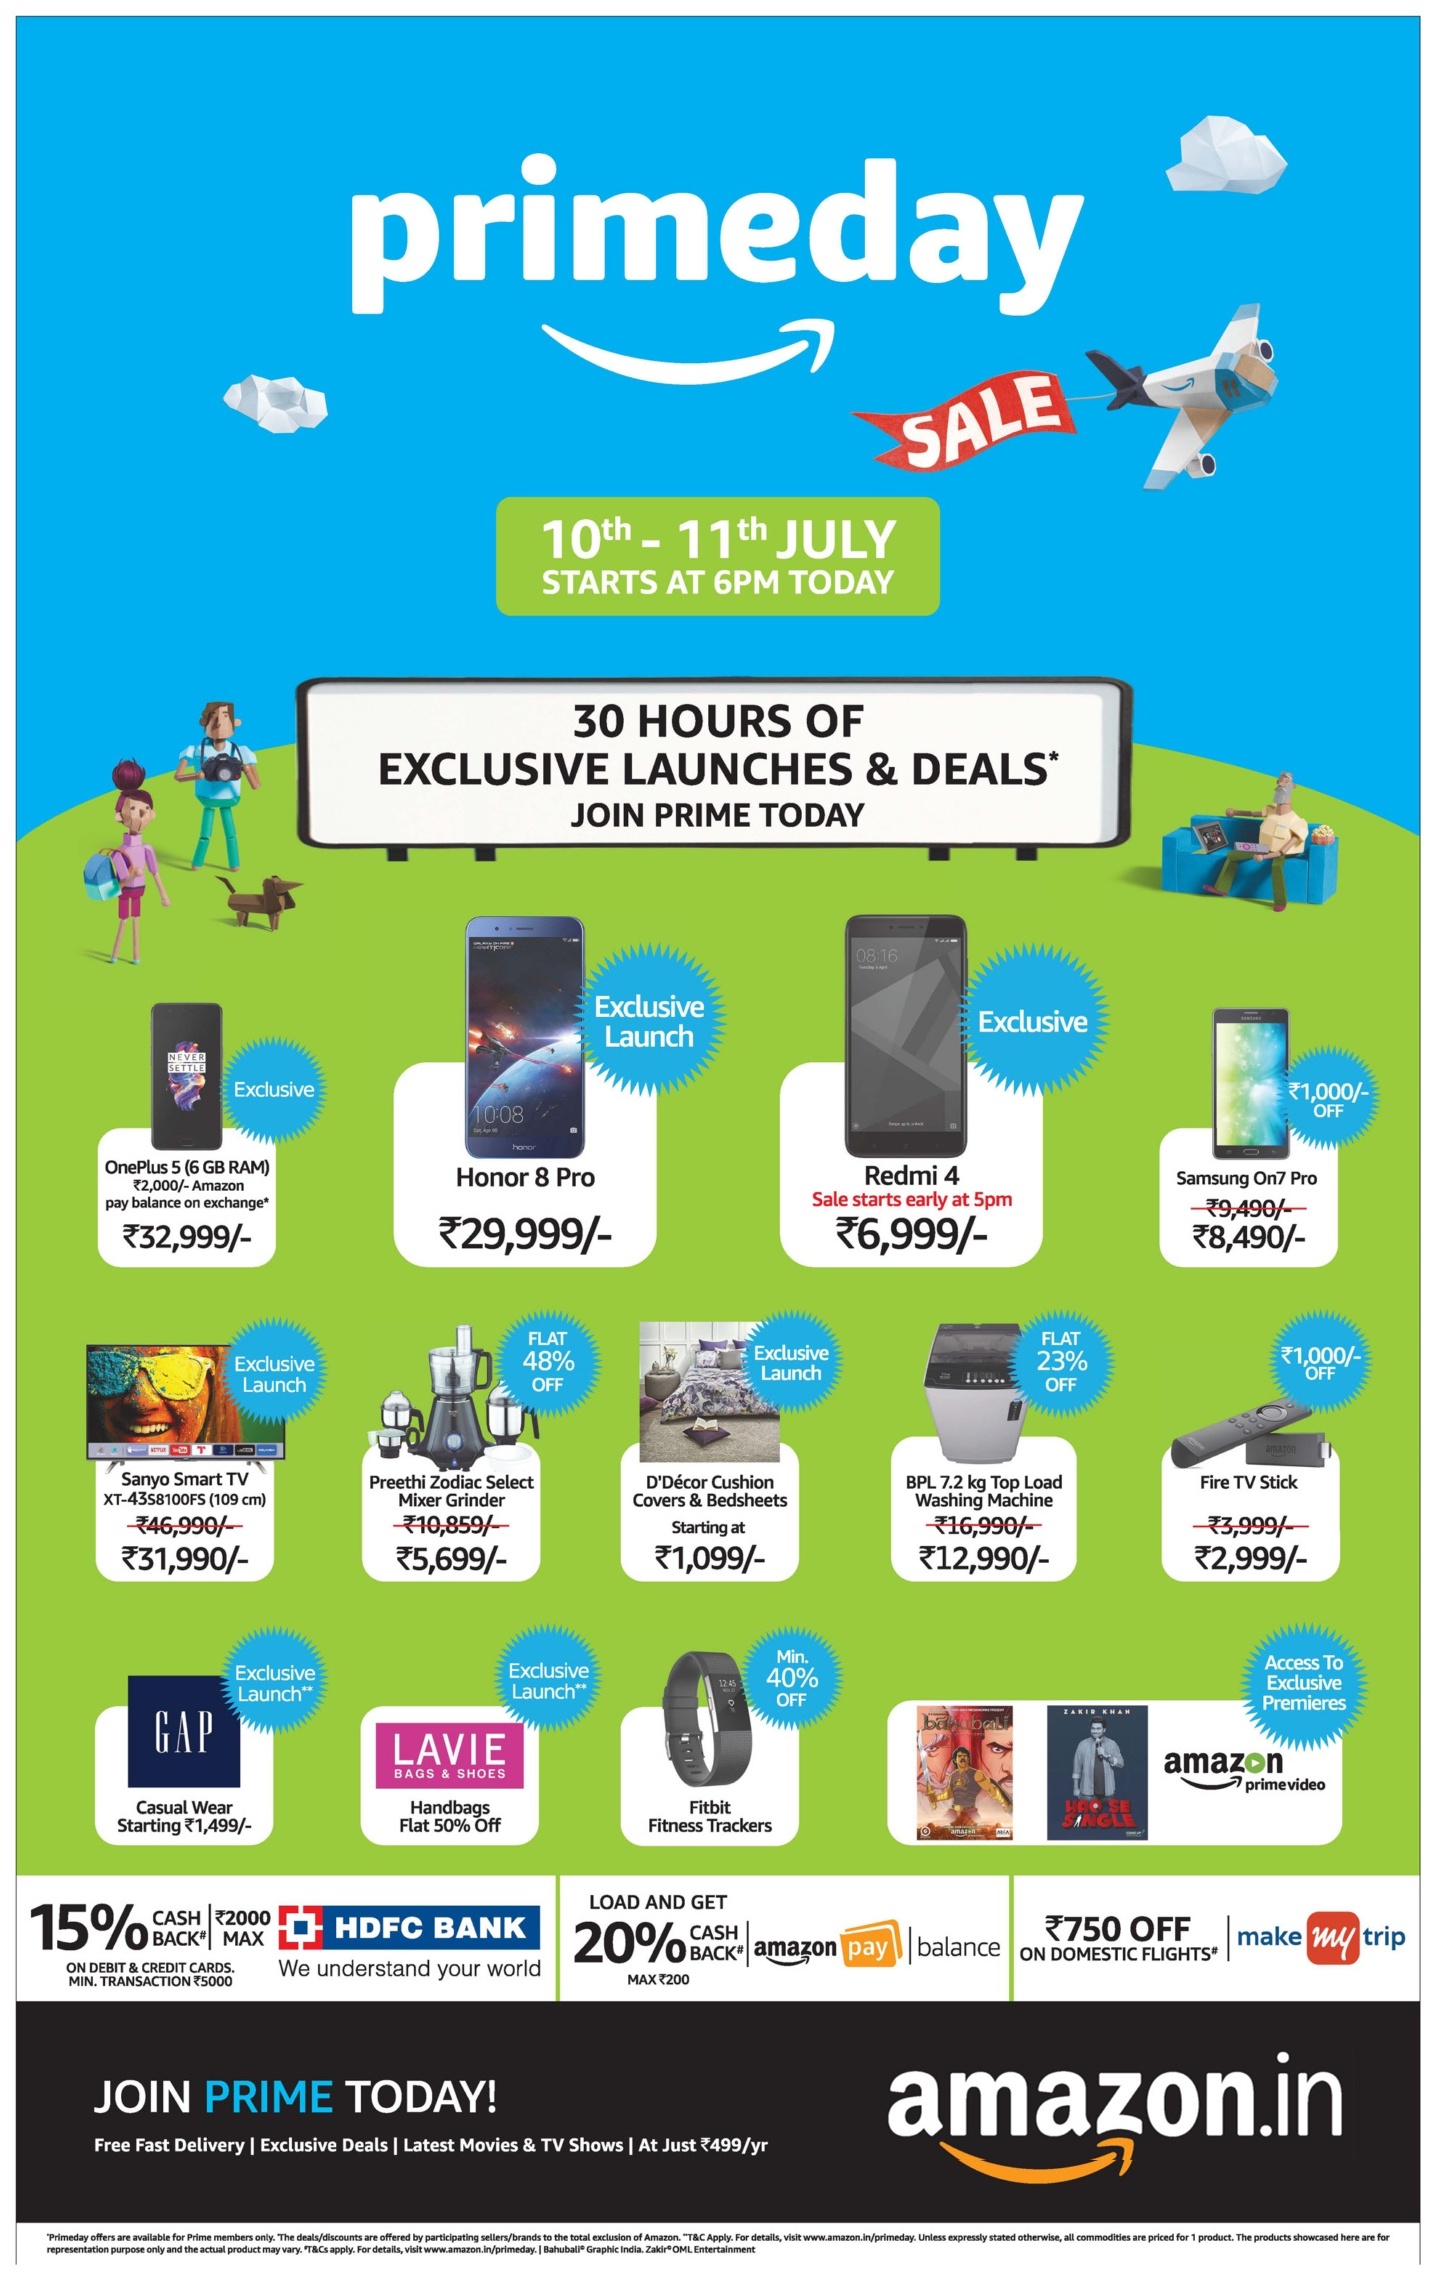 Amazon Prime Day Sale 30 Hours of Exclusive Launches & Deals Ad